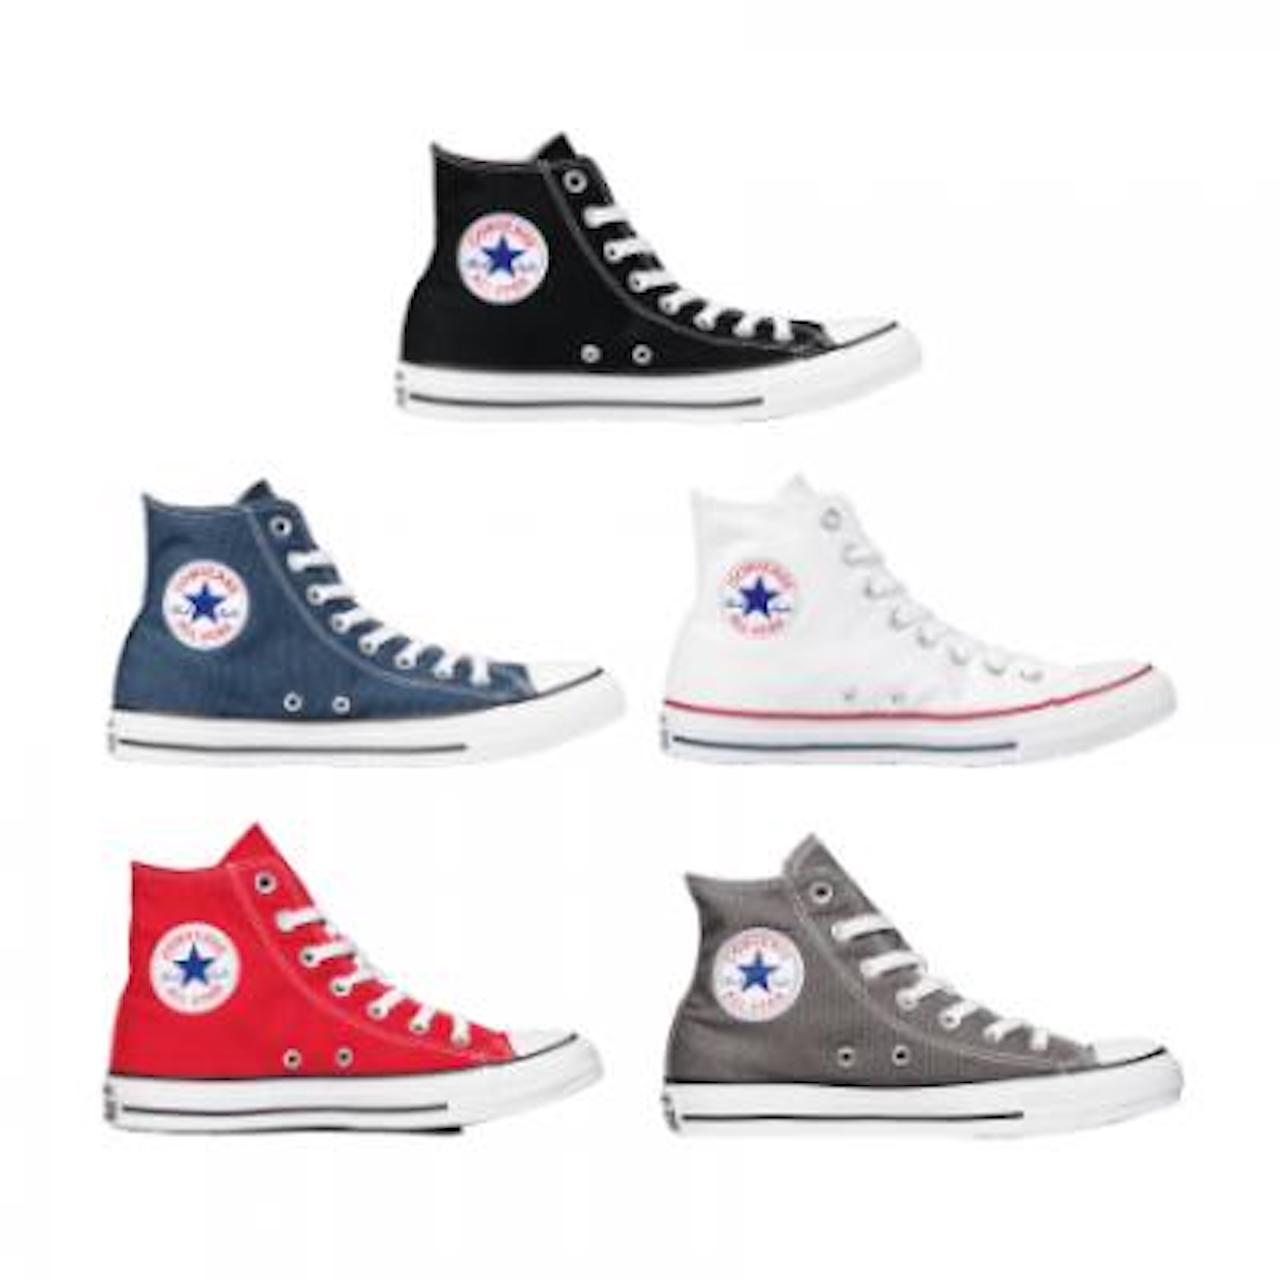 Top 76+ images converse shoes wholesale lots - In.thptnganamst.edu.vn